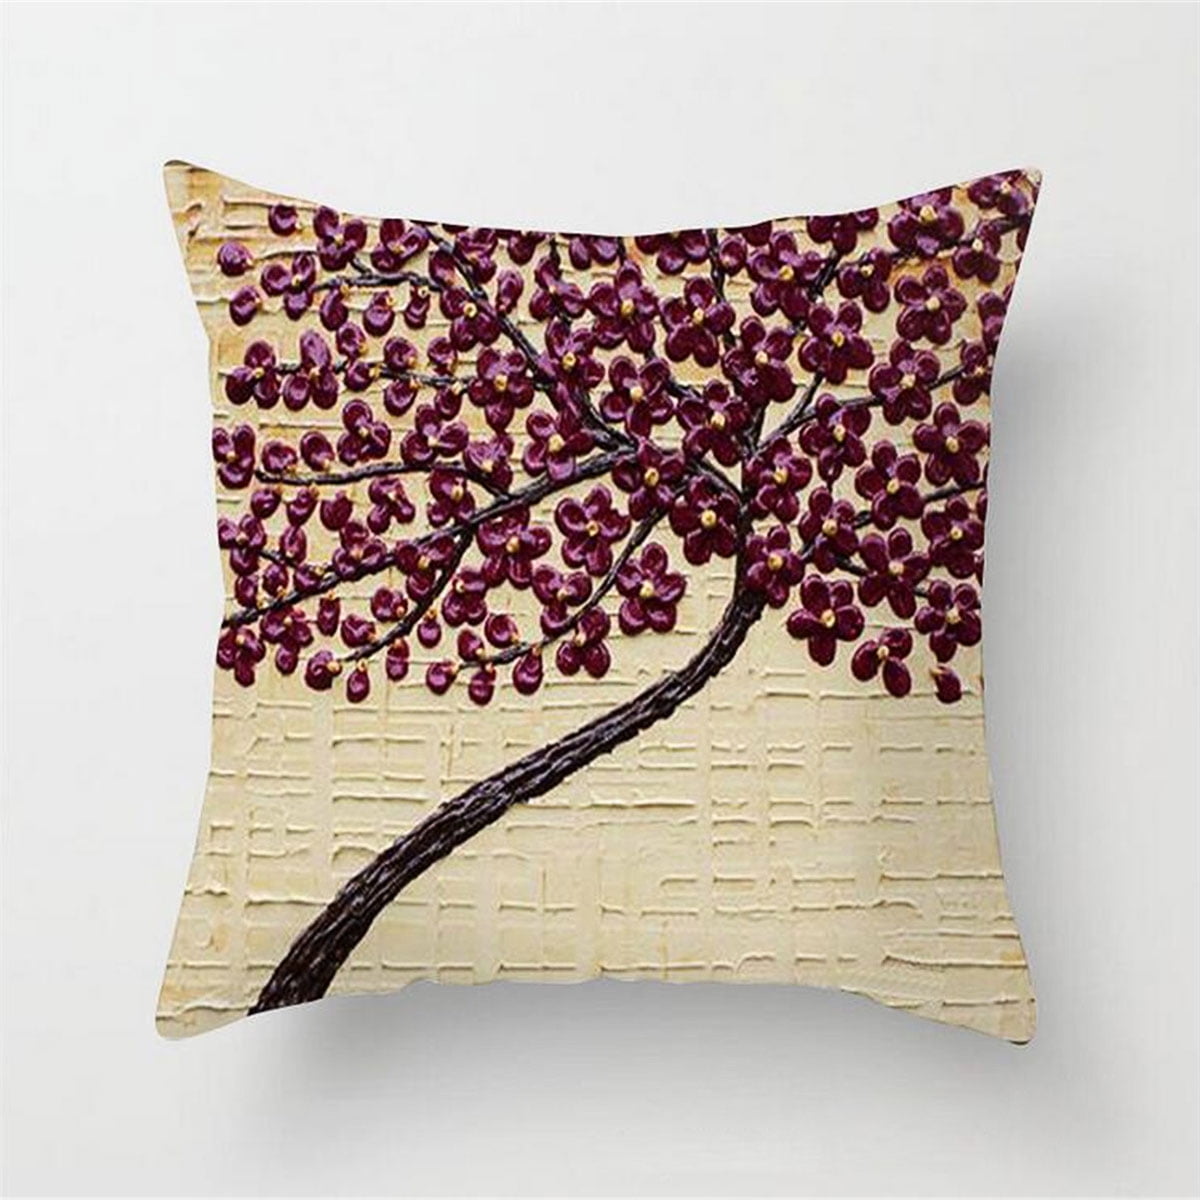 Cotton Embroidered Cushion Cover Pillowcase Pillowslips Square 45 x 45 cm